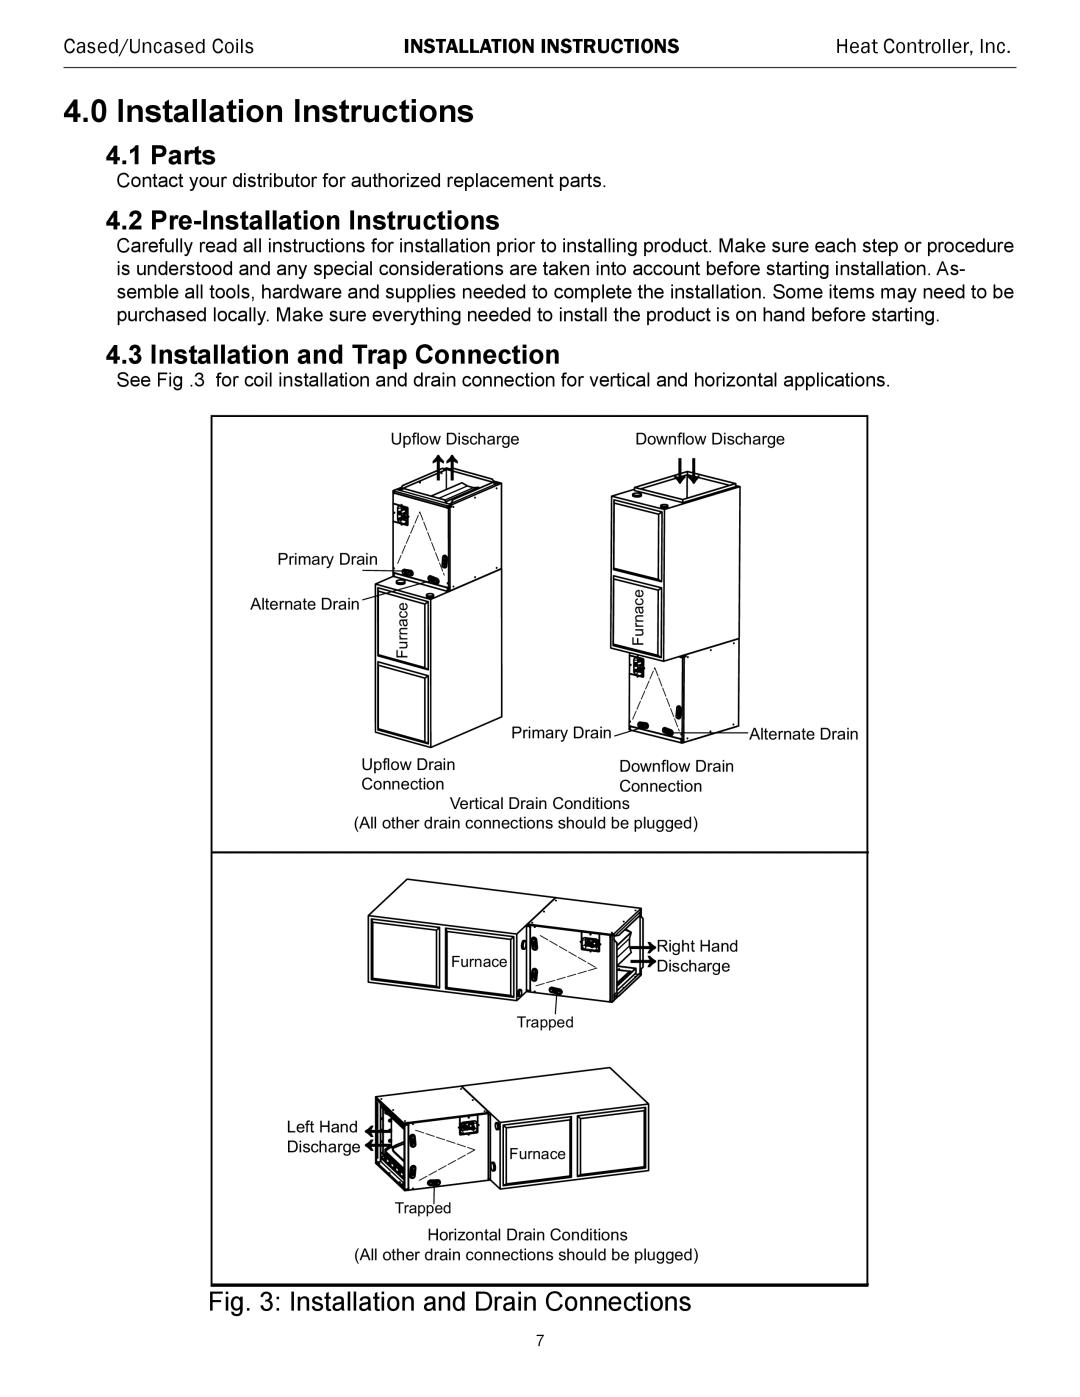 Heat Controller MDG SERIES 4.0Installation Instructions, 4.1Parts, Pre-InstallationInstructions, Cased/Uncased Coils 